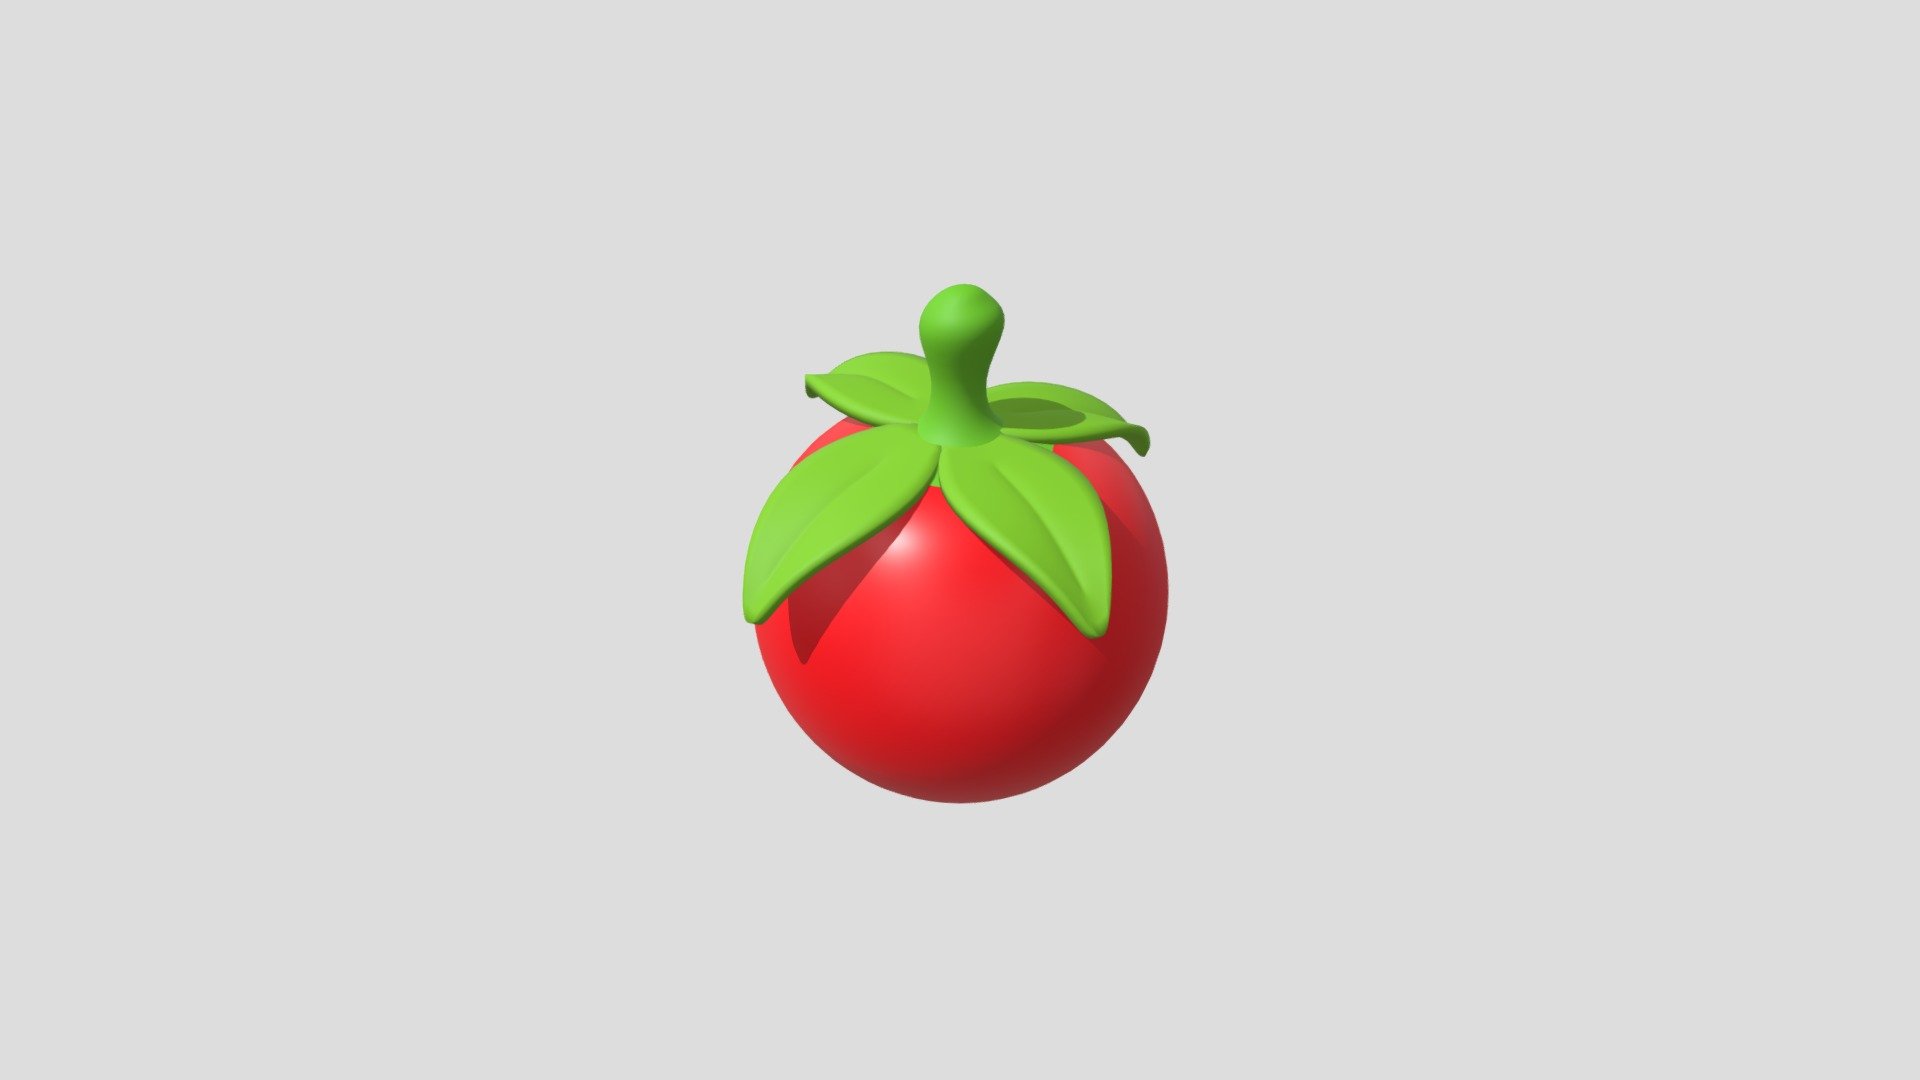 Tomato made in Blender🍅🍅🍅

Follow my IG for more𓍢ִ໋🌷͙֒ - Tomato - Download Free 3D model by LalaHolmess 3d model